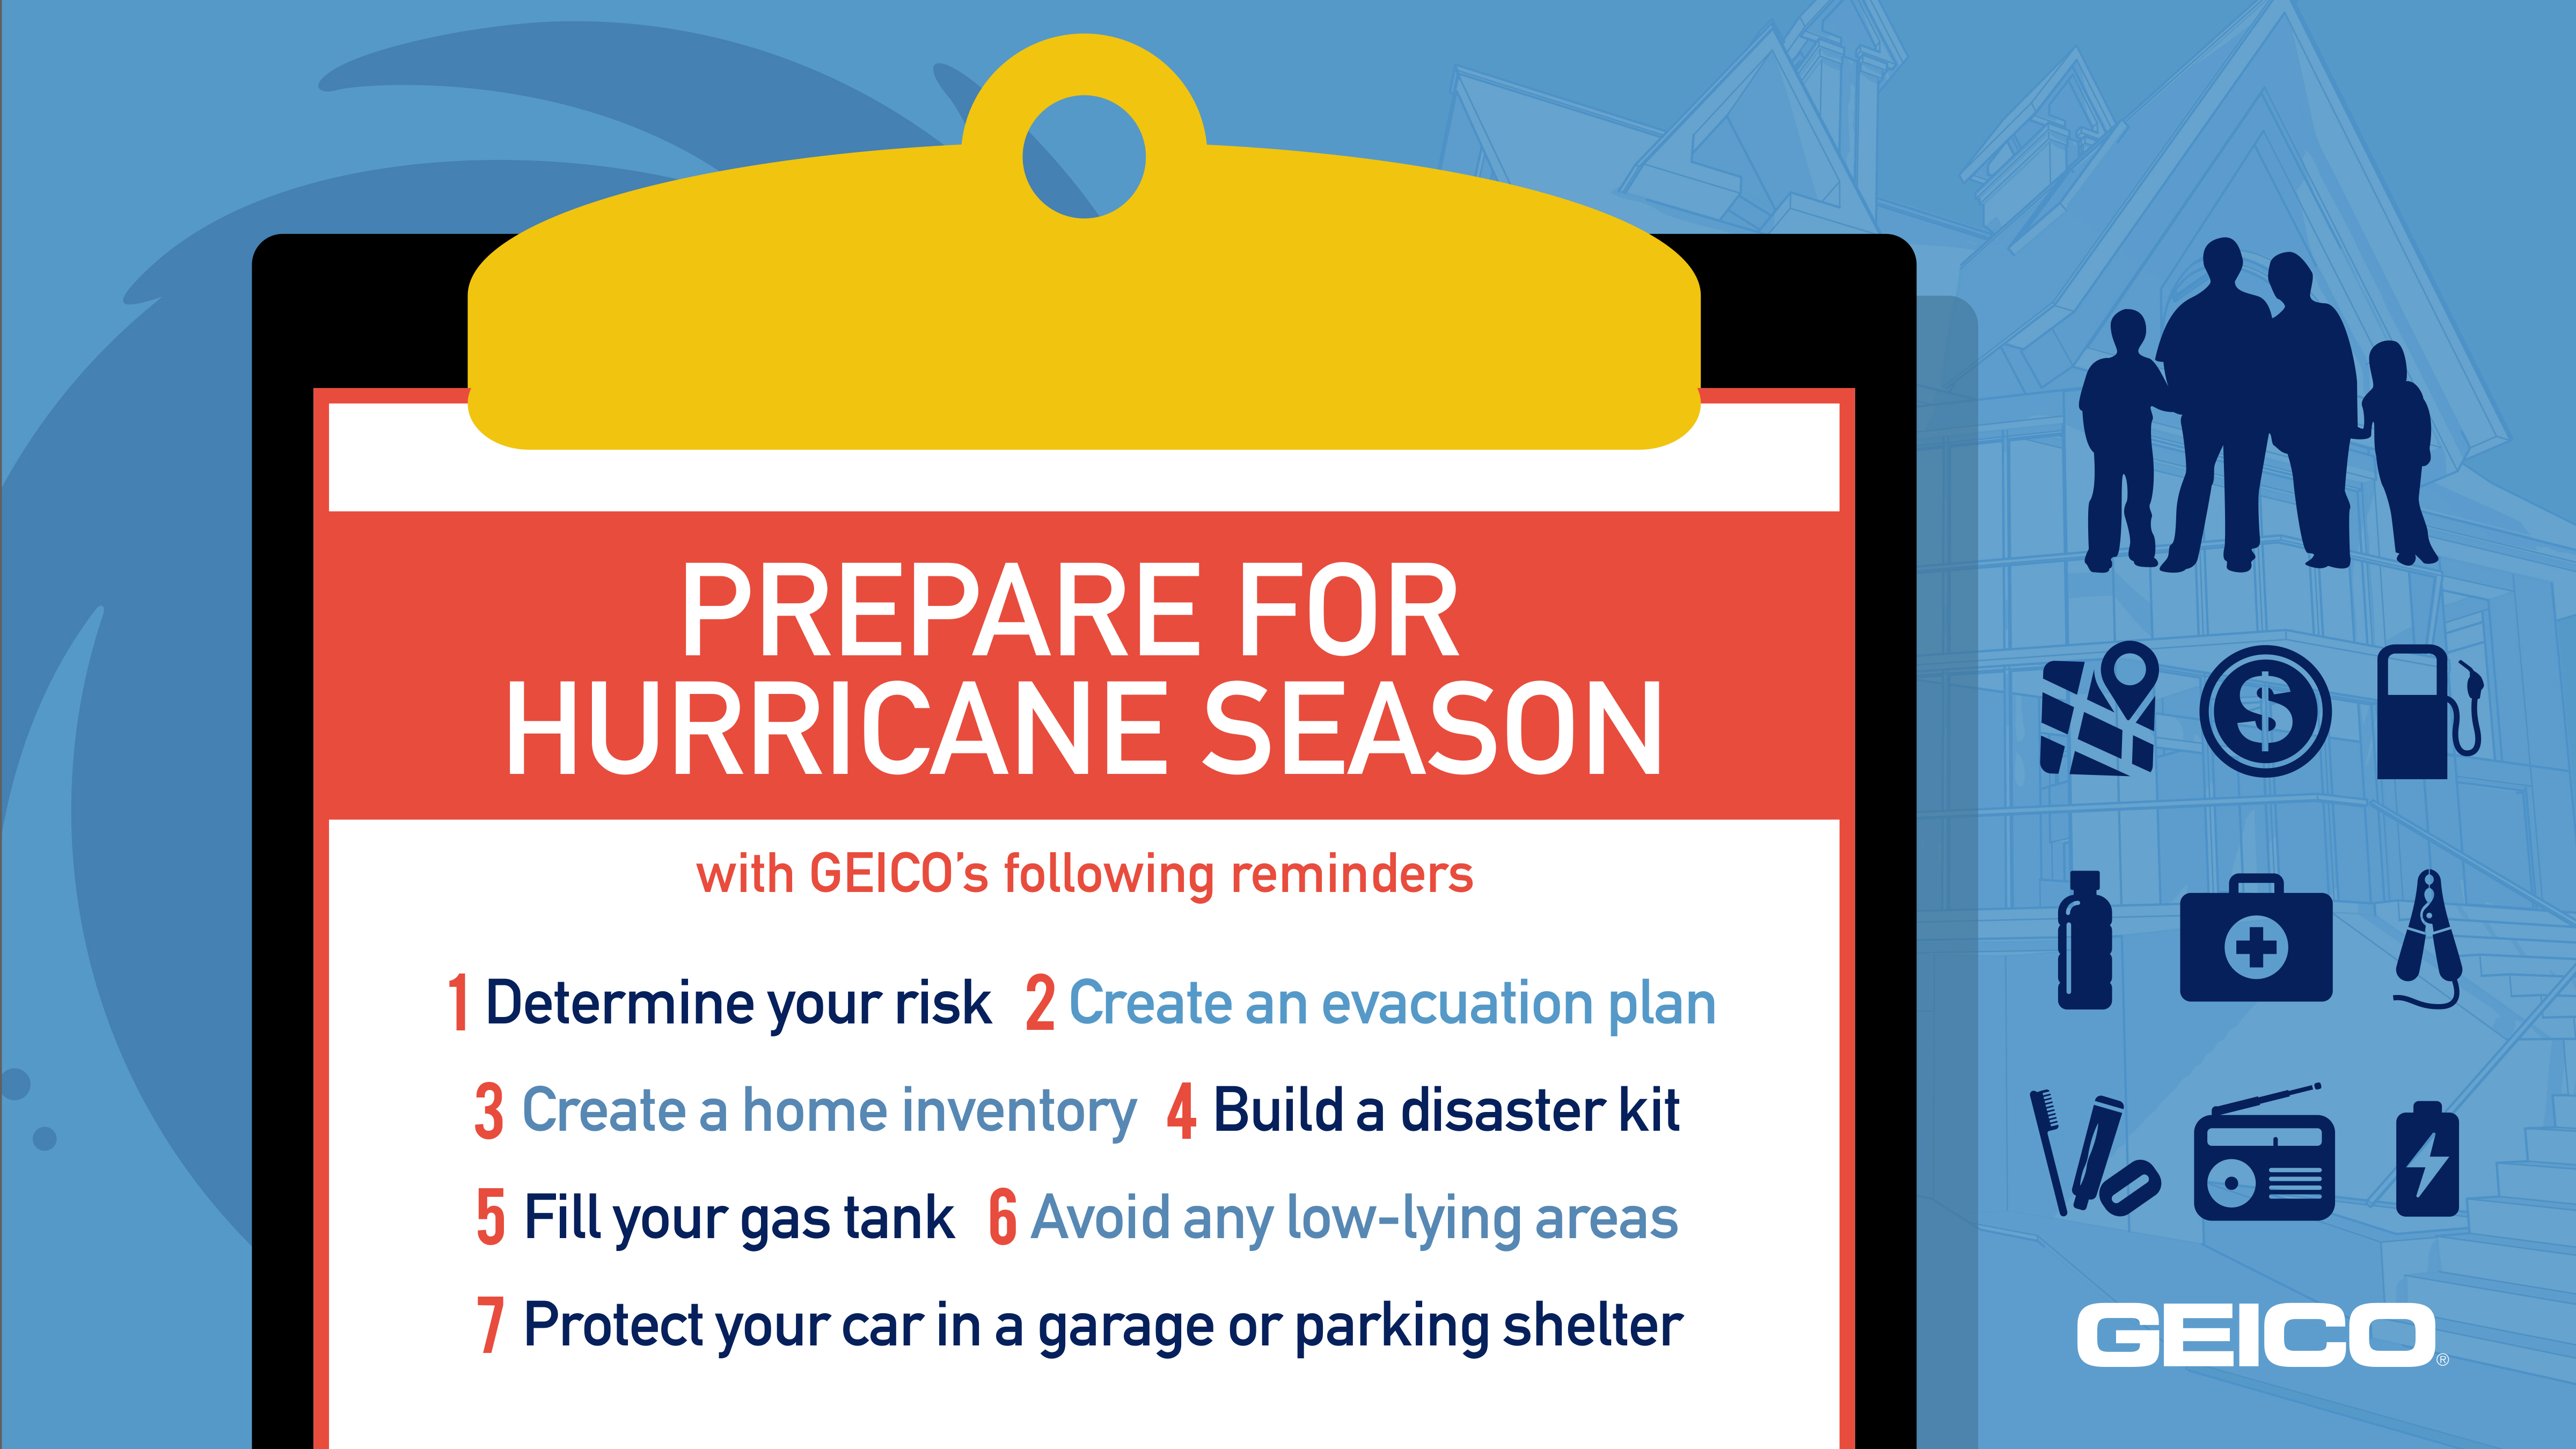 Prepare for Hurricane Season with GEICO's Following Reminders